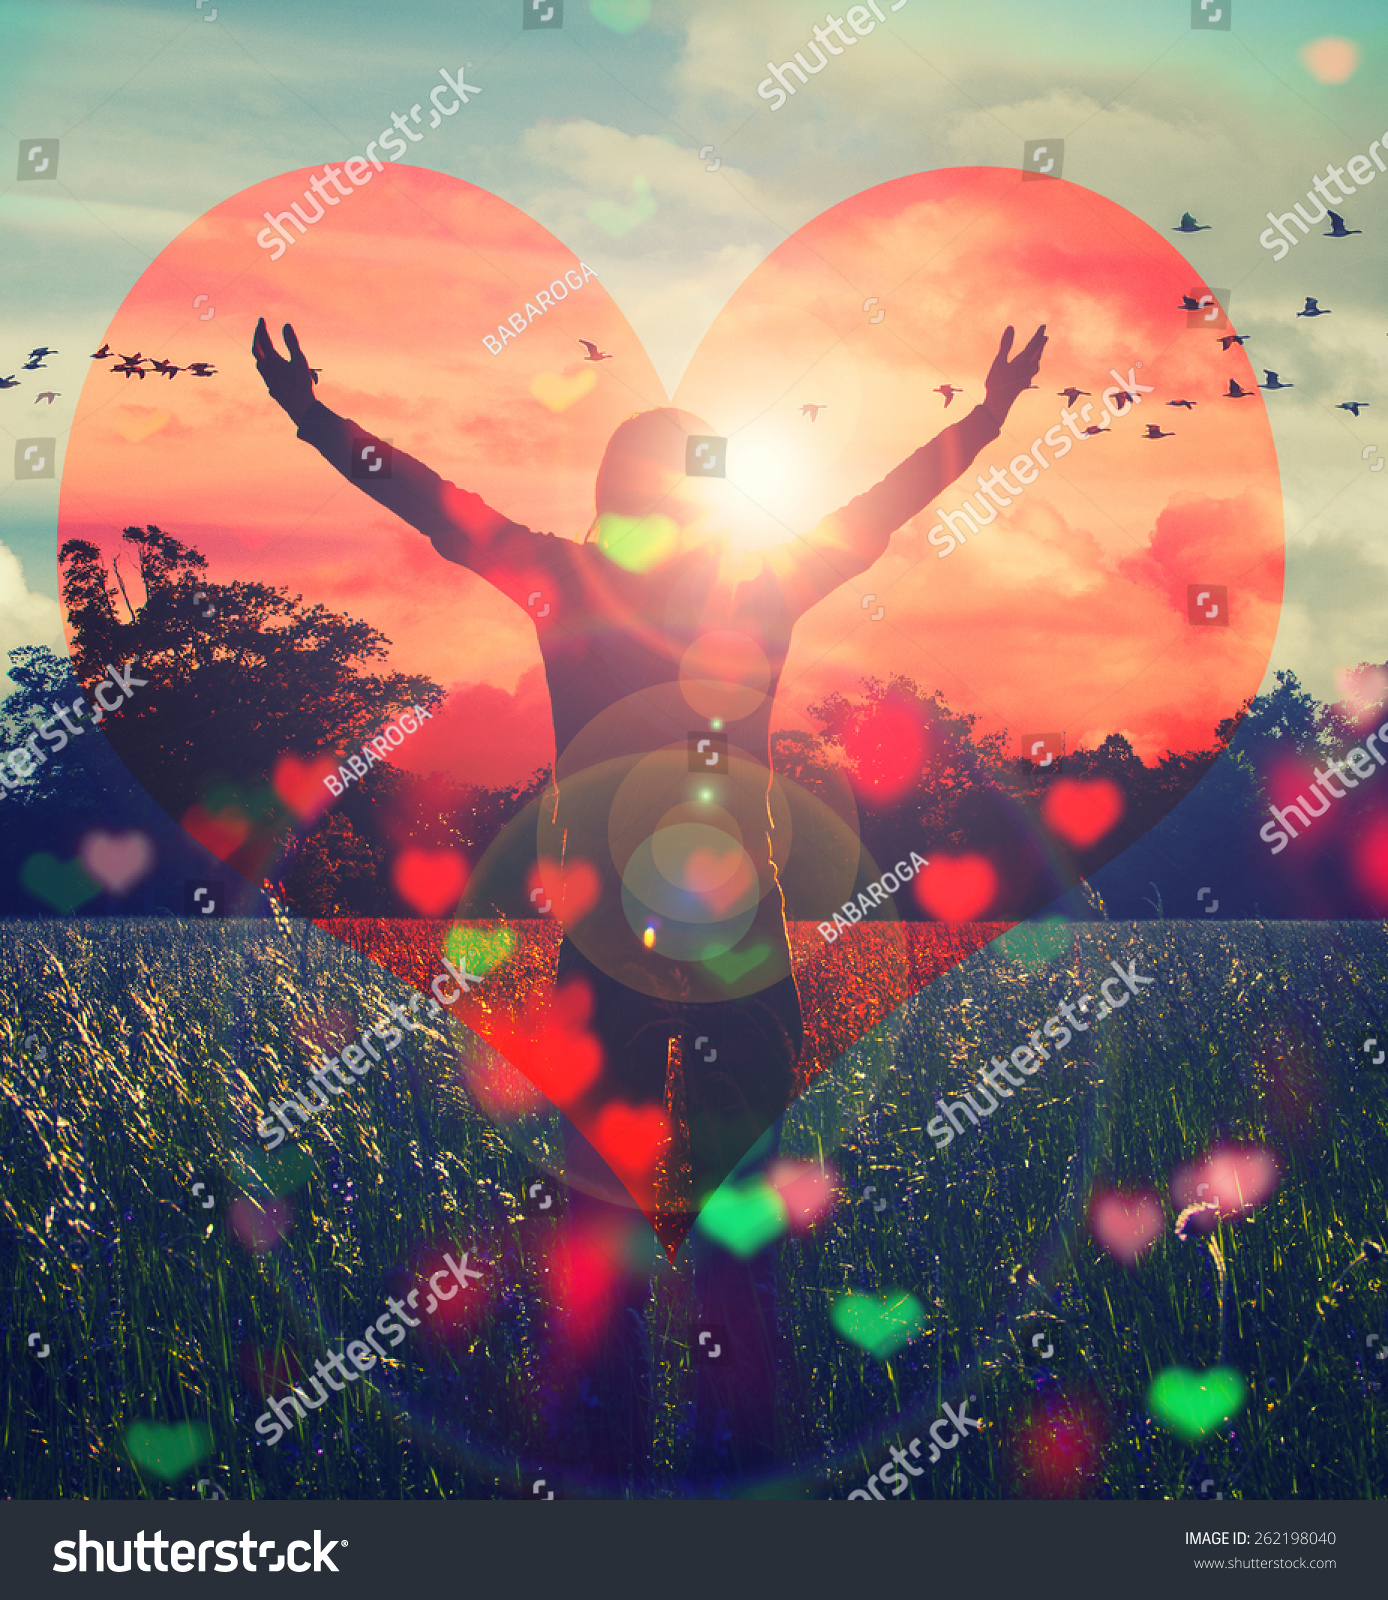 Young Girl Spreading Hands Joy Inspiration Stock Photo 262198040 ...